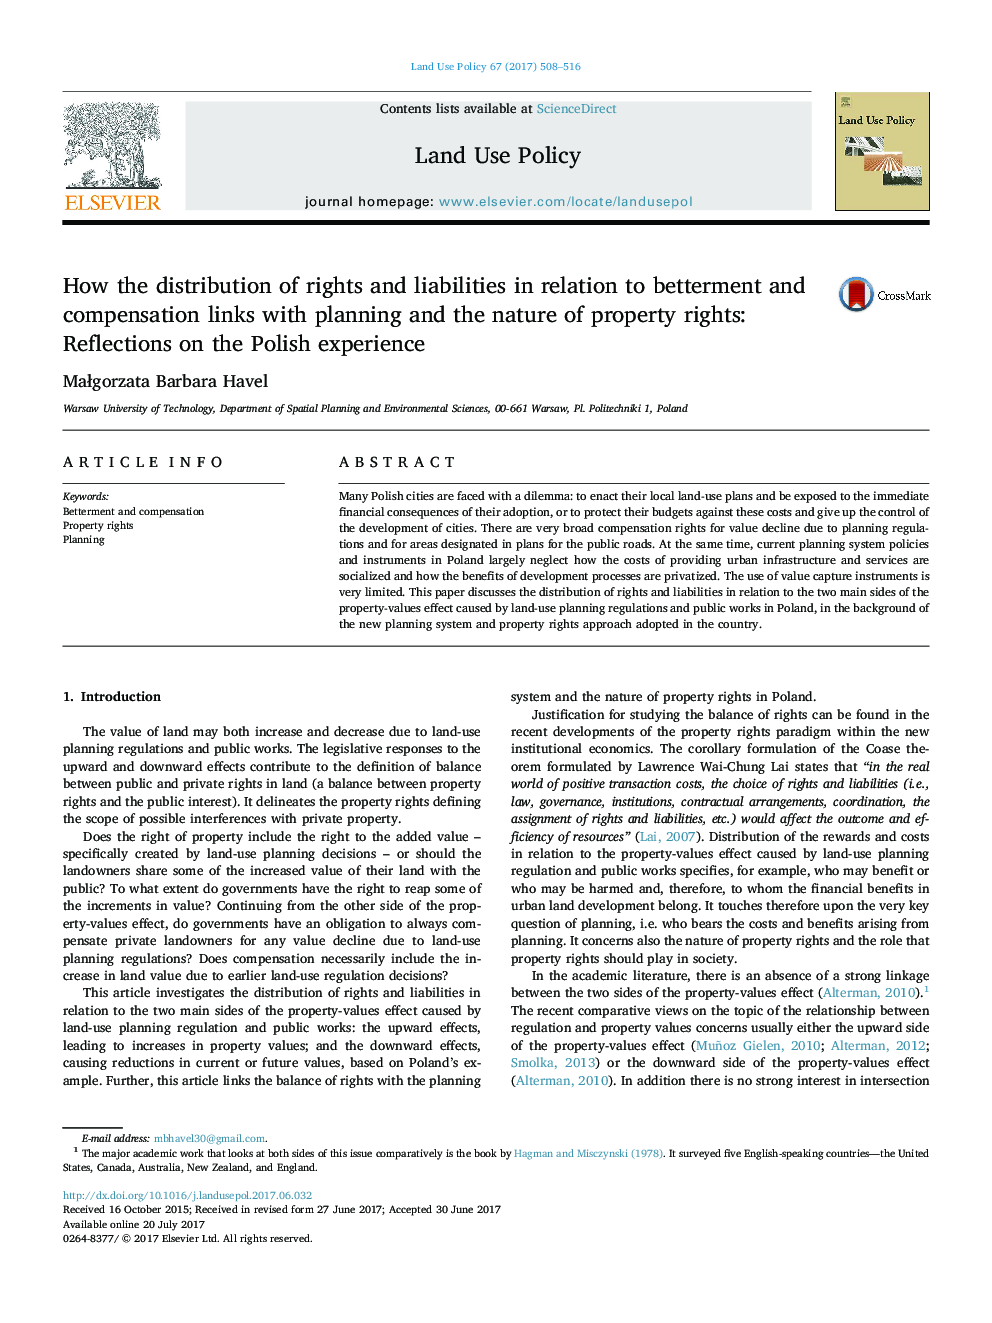 How the distribution of rights and liabilities in relation to betterment and compensation links with planning and the nature of property rights: Reflections on the Polish experience